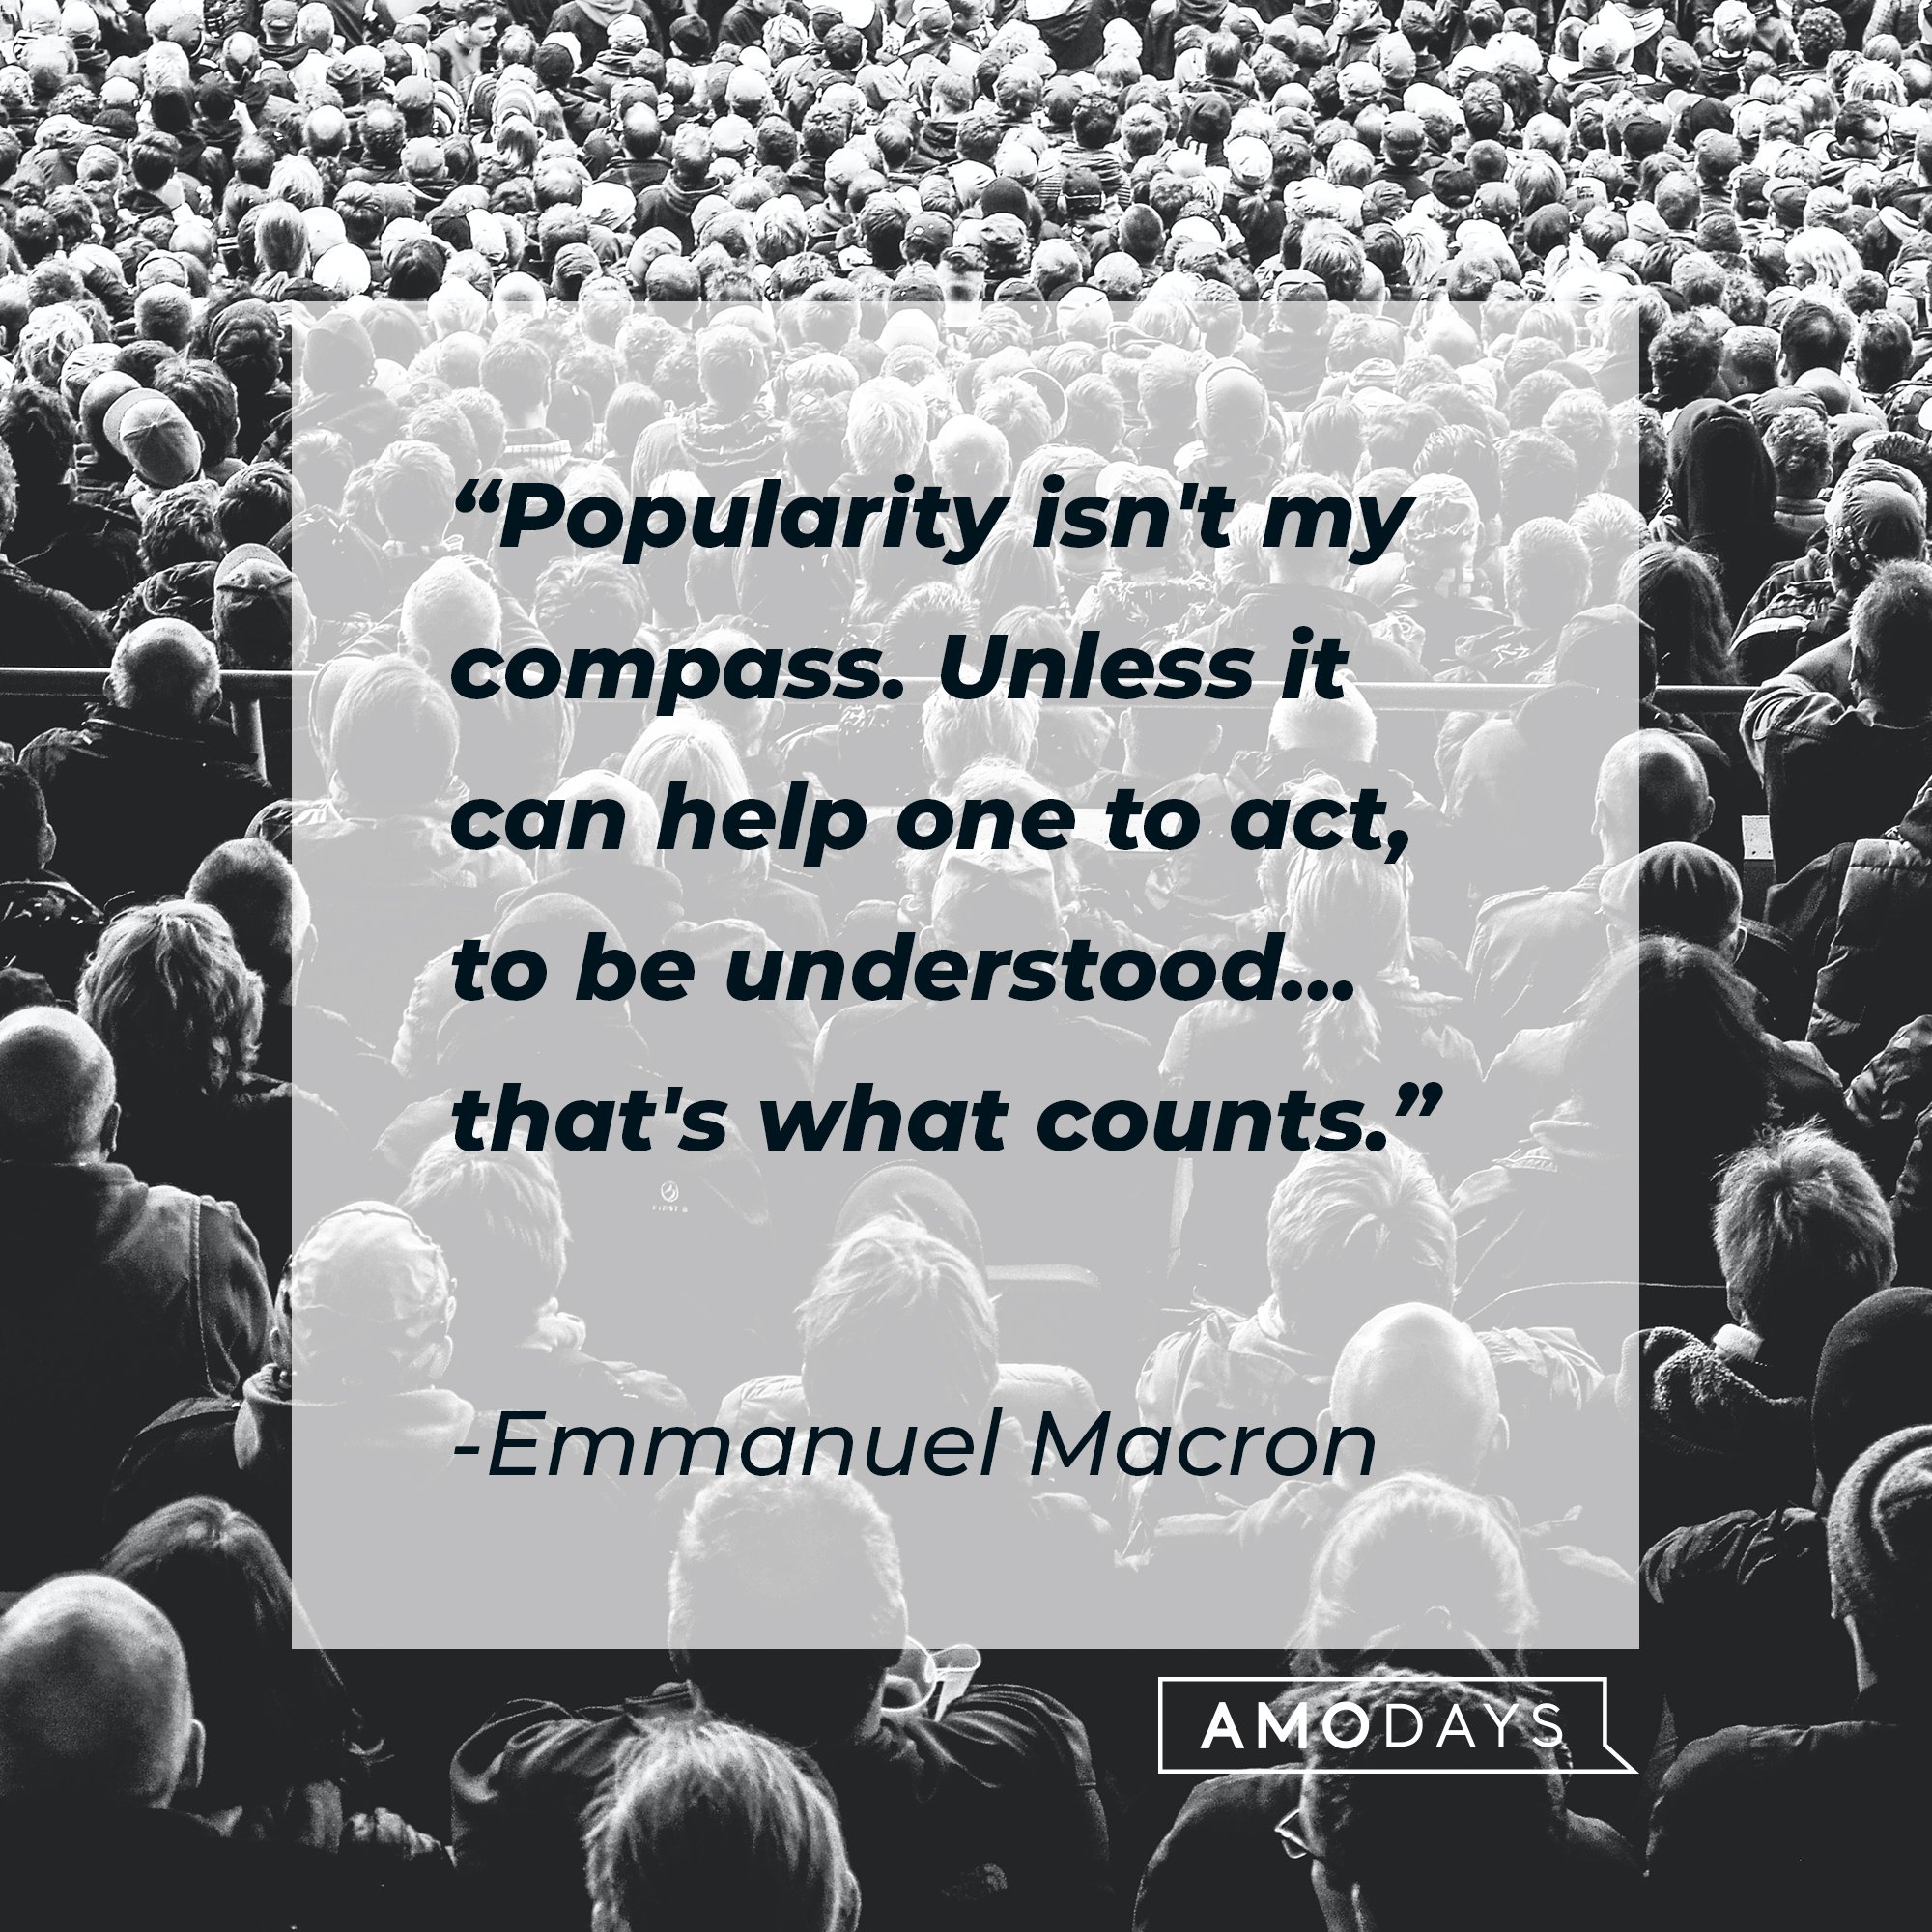 Emmanuel Macron’s quote: "Popularity isn't my compass. Unless it can help one to act, to be understood... that's what counts." | Images: AmoDays